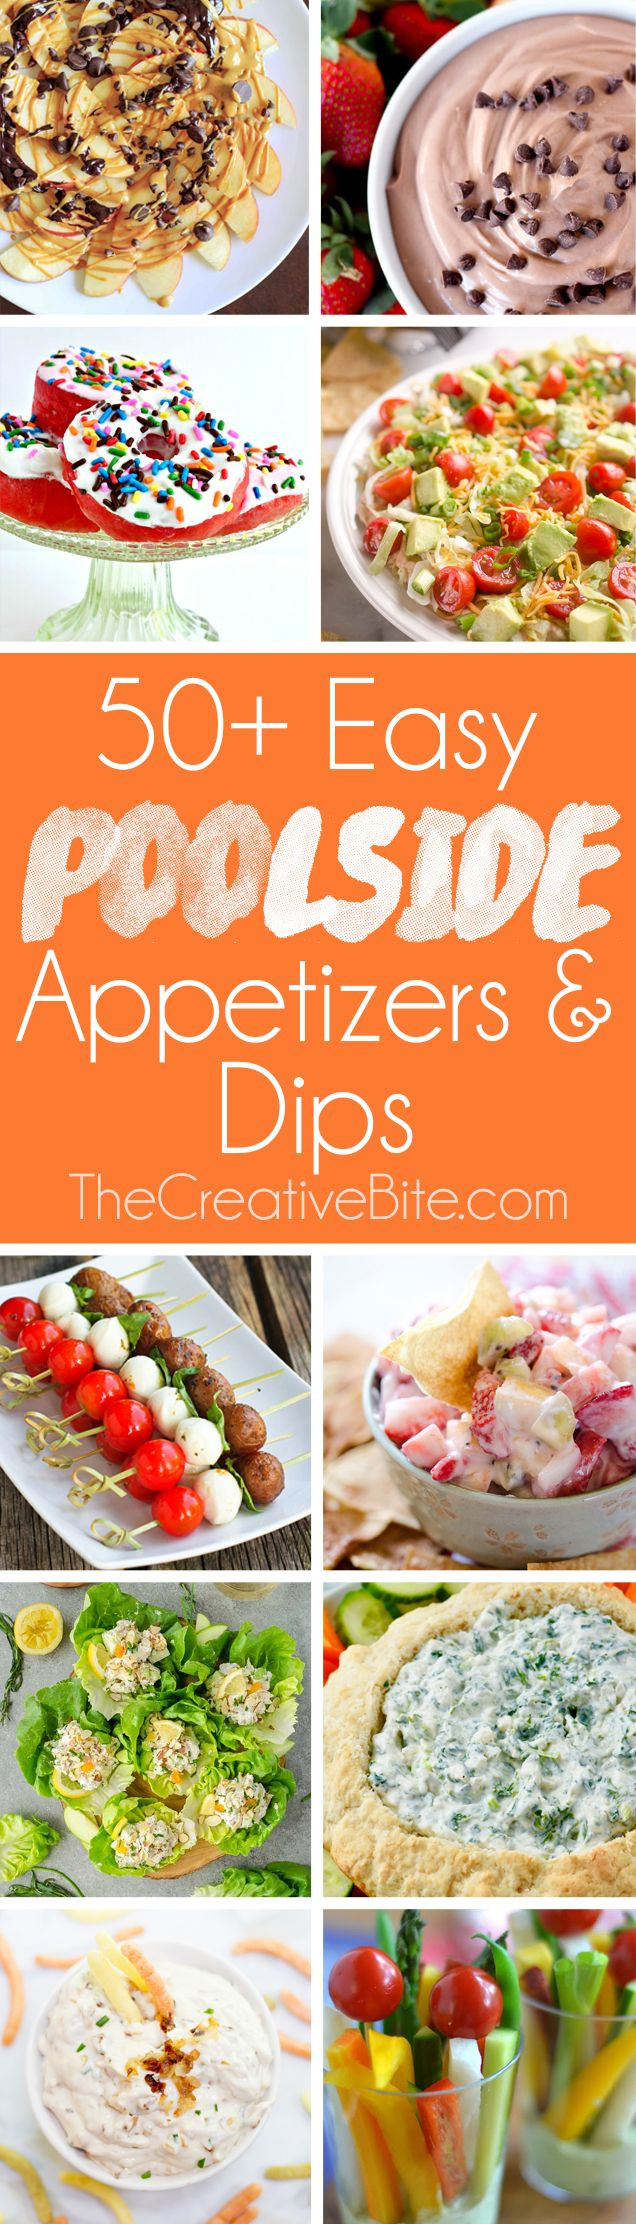 Summer Appetizers Finger Food
 50 Easy Poolside Appetizers & Dips are a collection of